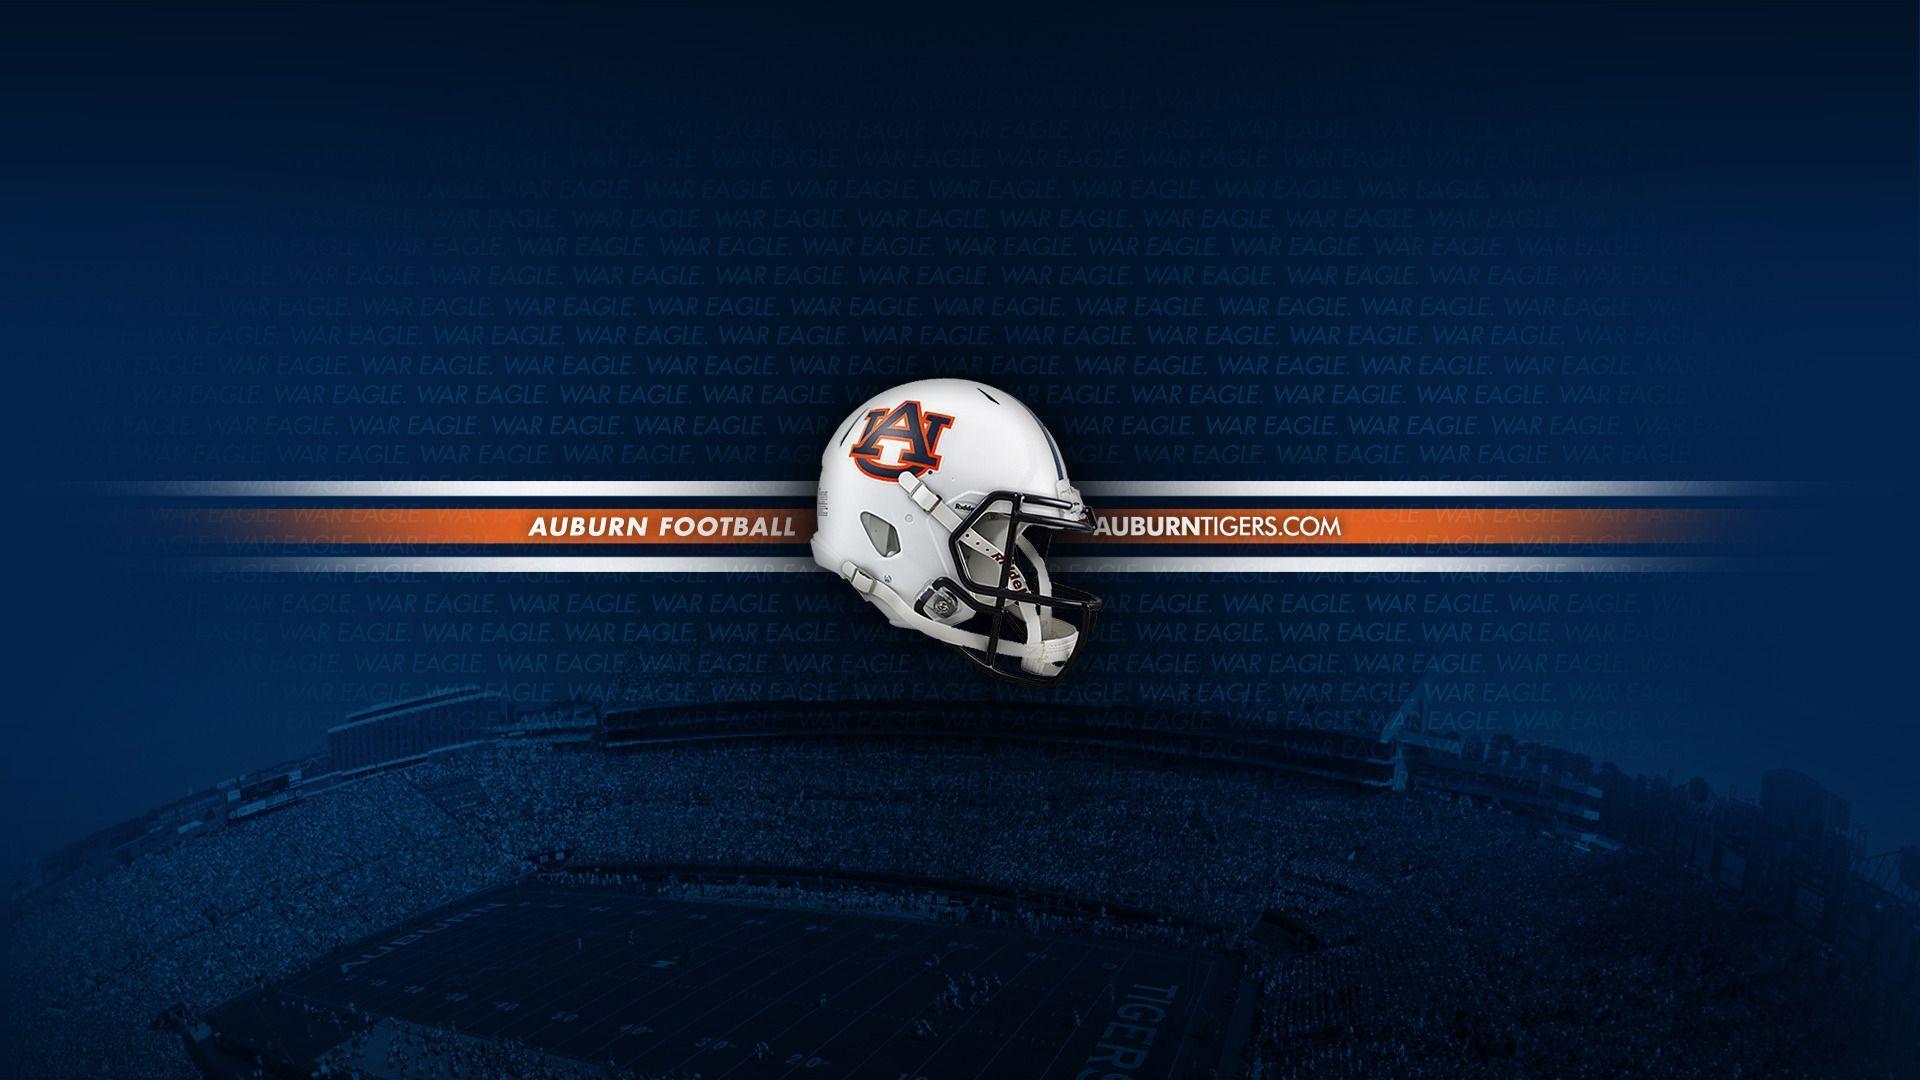 Auburn Tigers Wallpaper, Browser Themes & Other Downloads